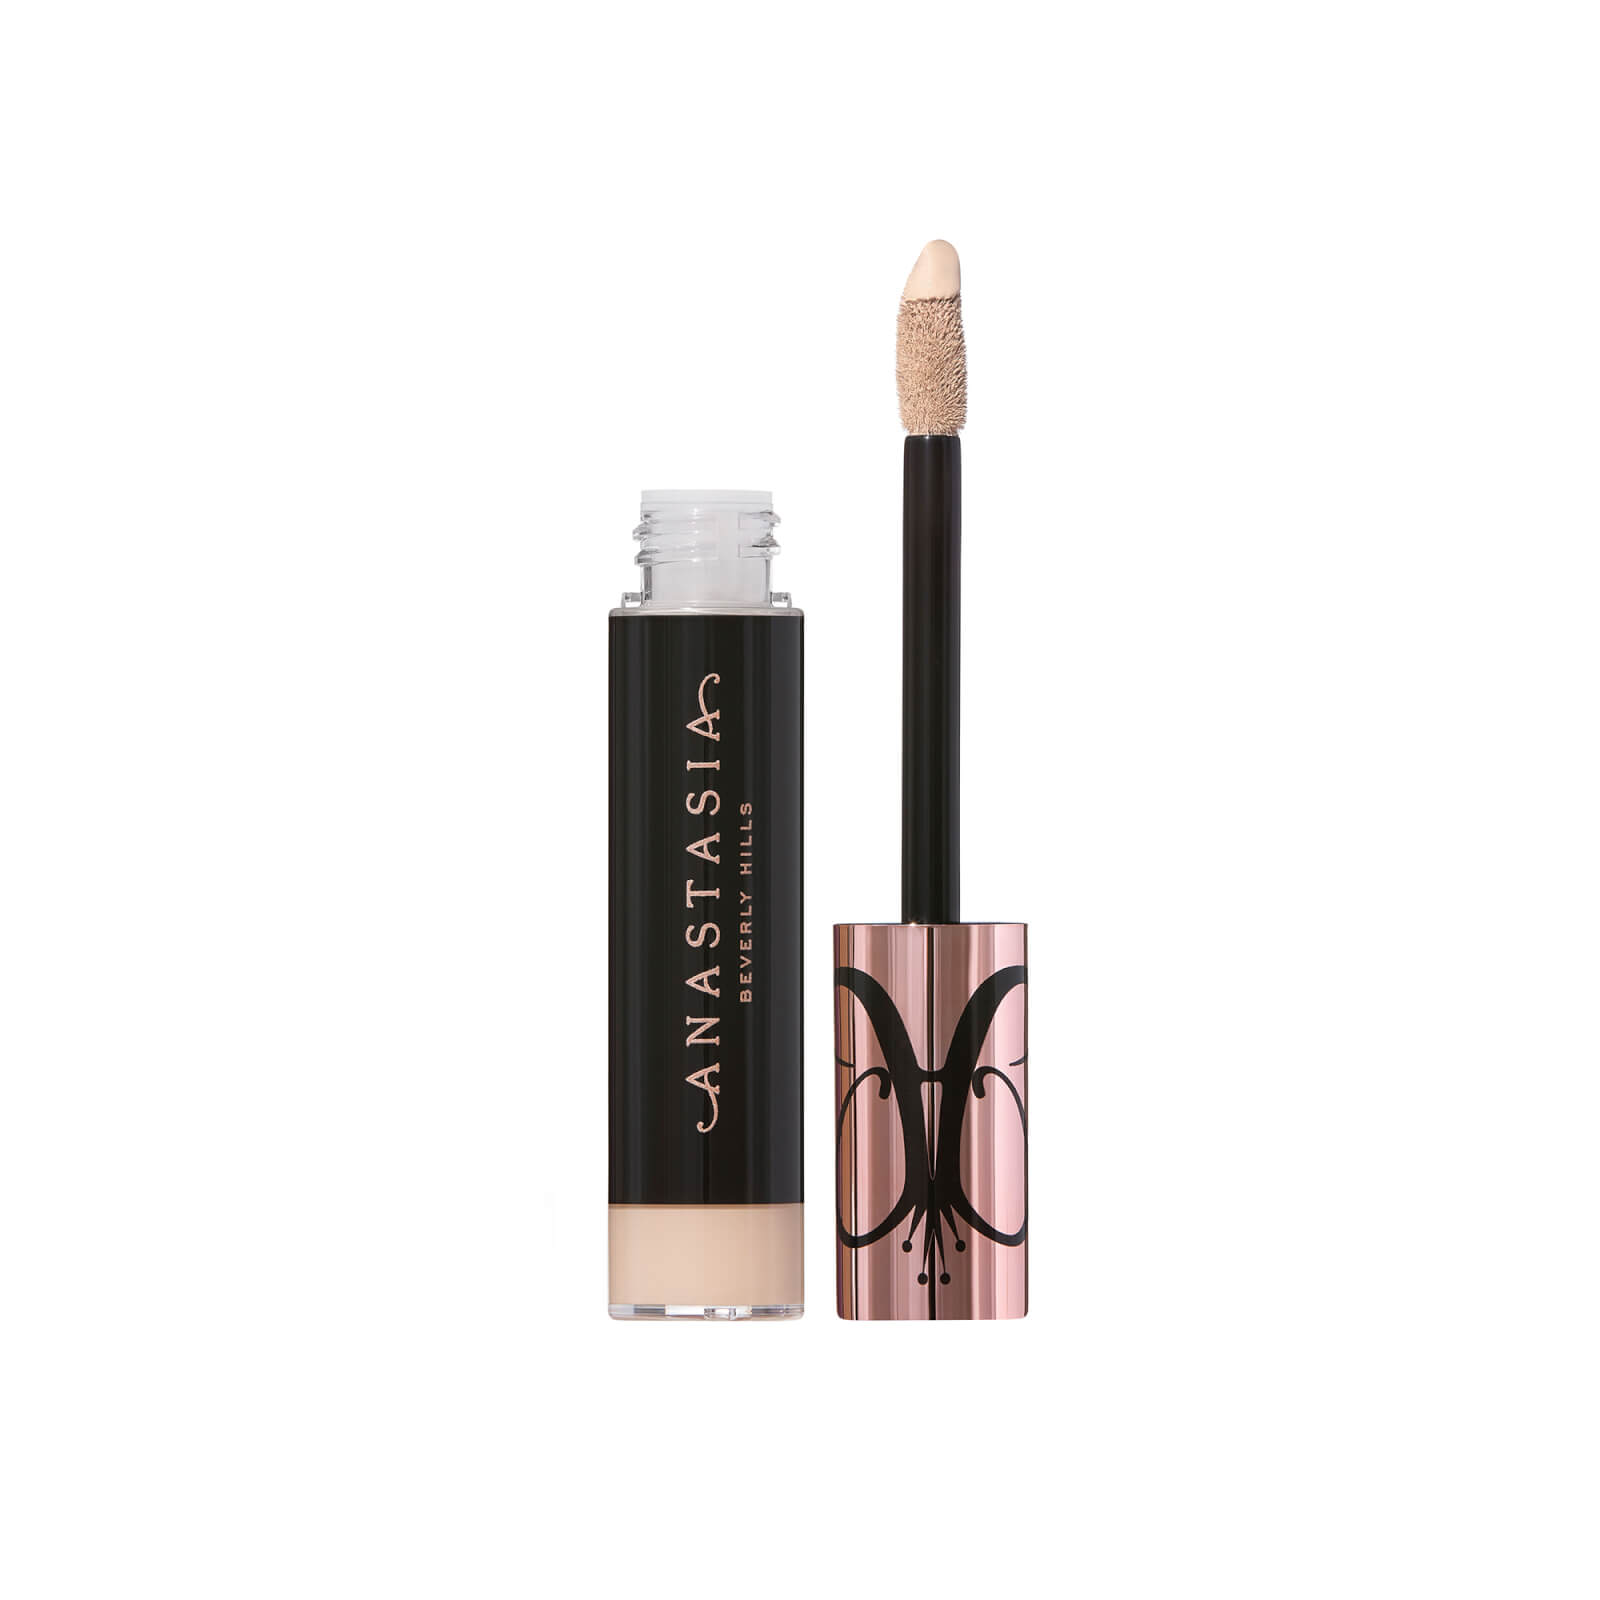 Anastasia Beverly Hills Magic Touch Concealer 12ml (Various Shades) - 7